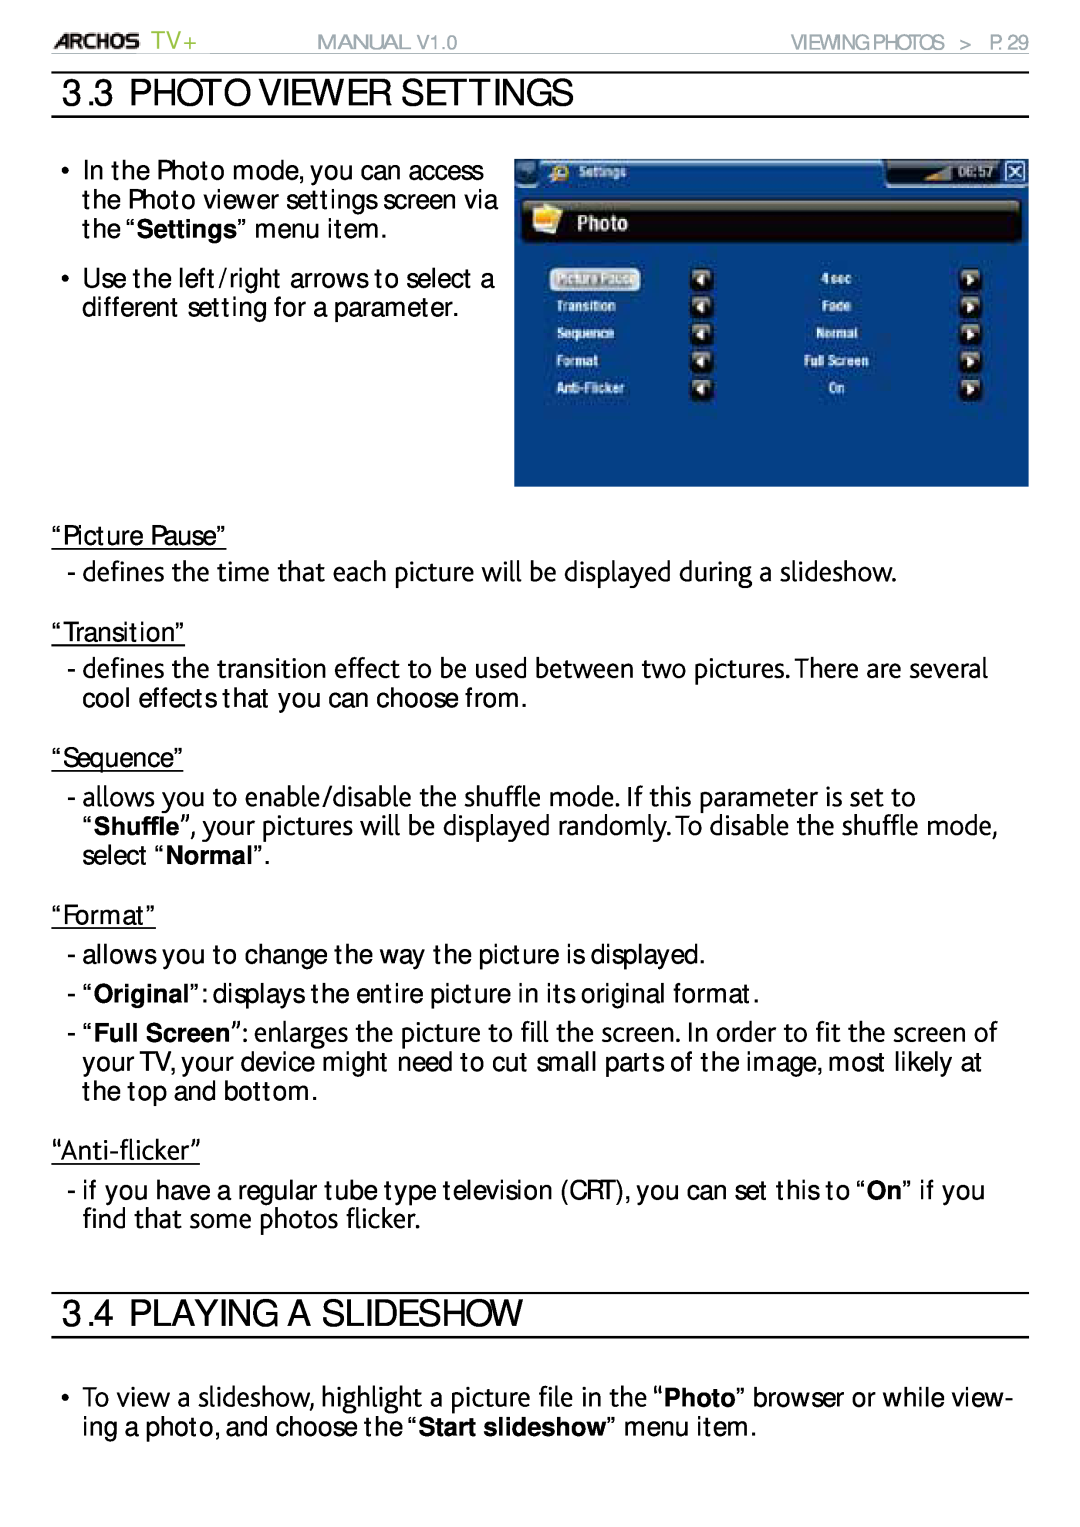 Archos 500973 user manual Photo Viewer Settings, Playing A Slideshow 